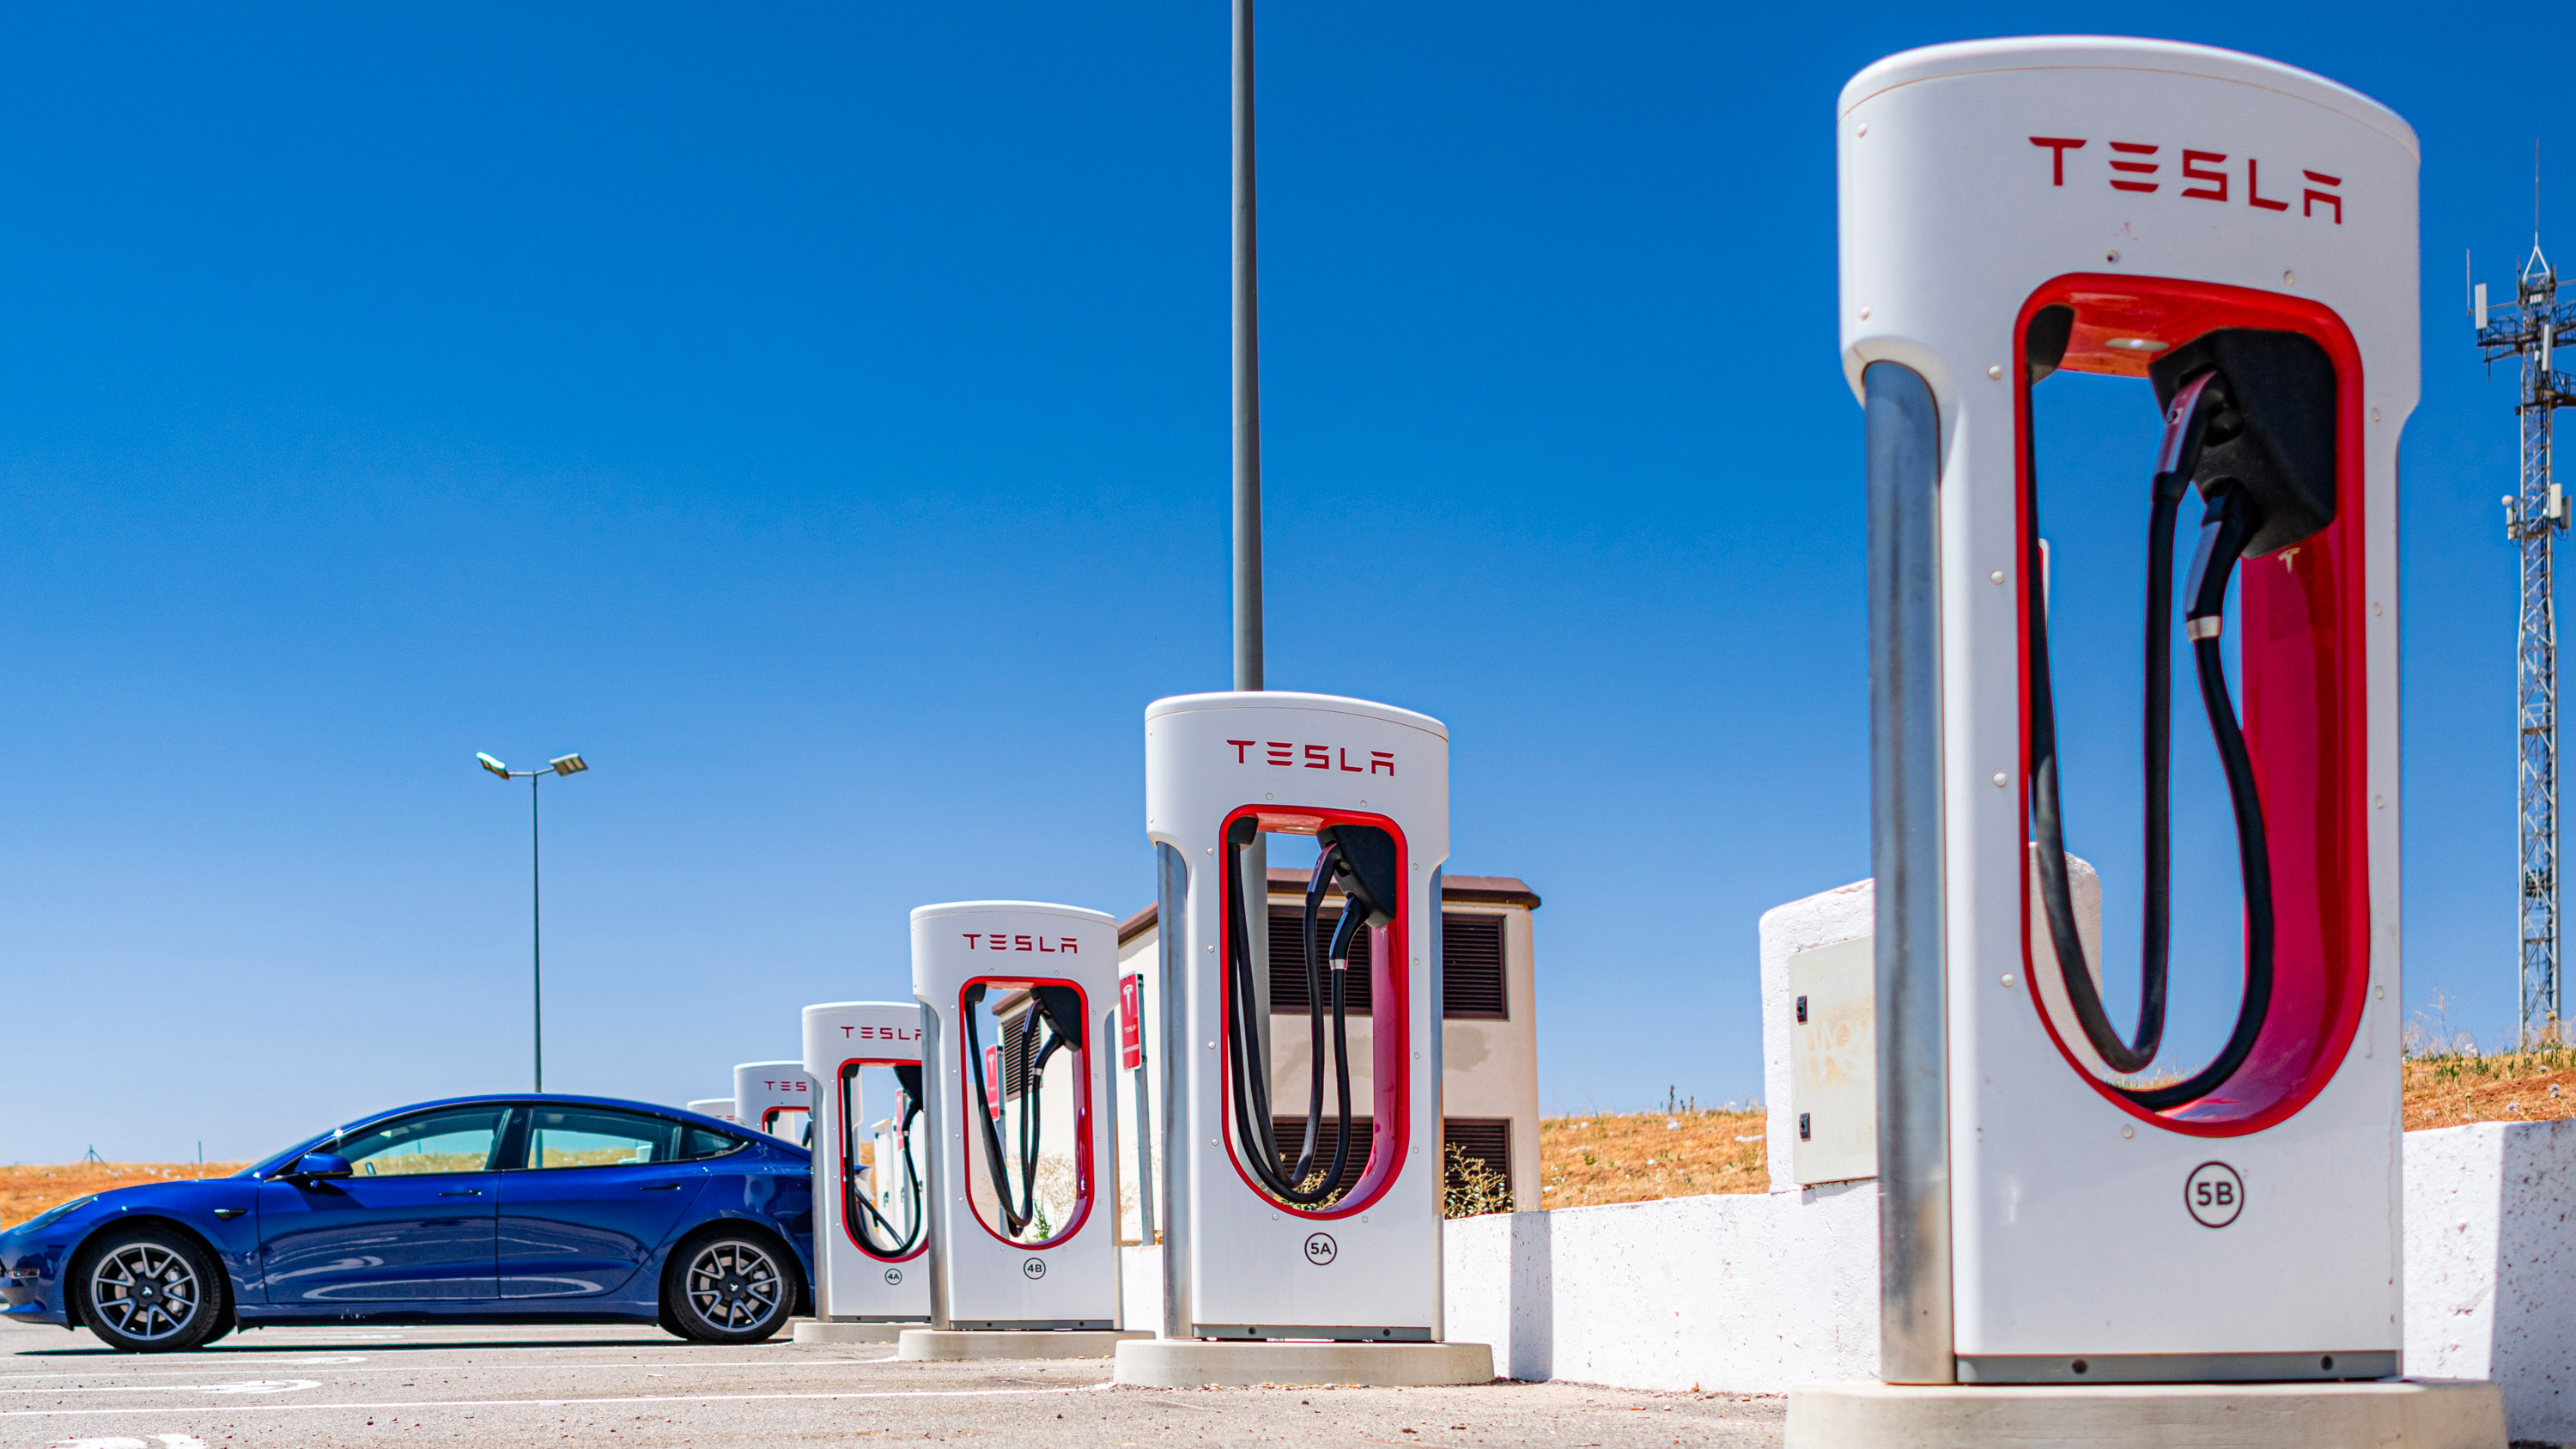 In the clash of the EV chargers, it's Tesla vs. everyone else | MIT Technology Review